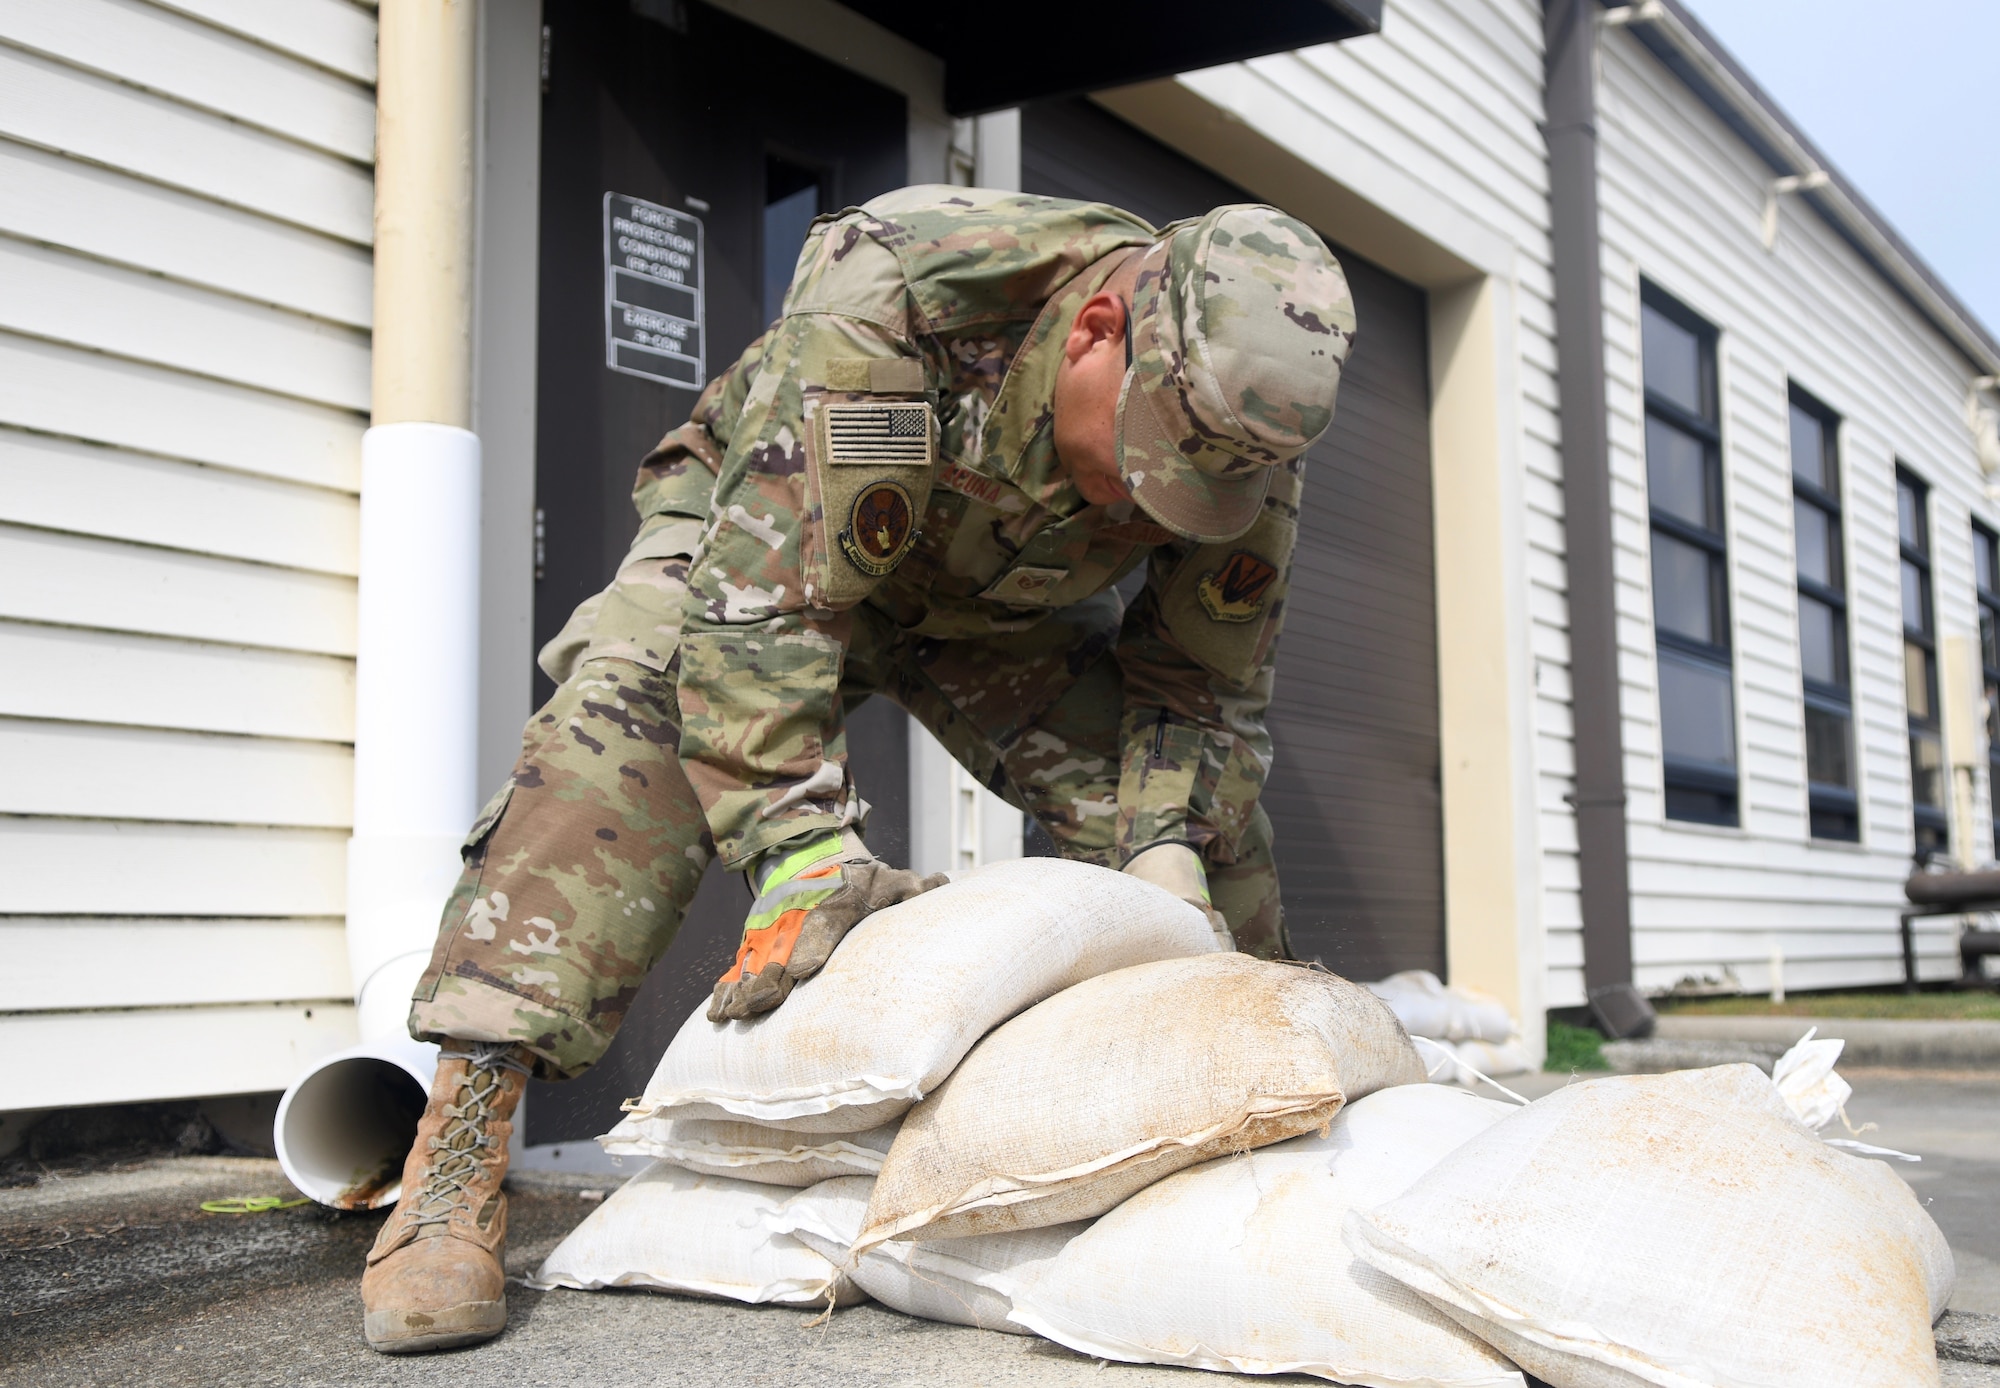 Seymour Johnson Air Force Base, N.C. — SSgt Manuel Acuna, 4th Civil Engineer Squadron pavement and production specialist, stack sand bags in front of a building on the installation Sept. 4, 2019, at Seymour Johnson Air Force Base, North Carolina. The 4th CES, to include equipment operators, electricians, plumbers, structural craftsman, heating, ventilation and air conditioning, and production technicians, are providing 24-hour response and recovery operations during and following Hurricane Dorian. (U.S. Air Force photo by Staff Sgt. Michael Charles)